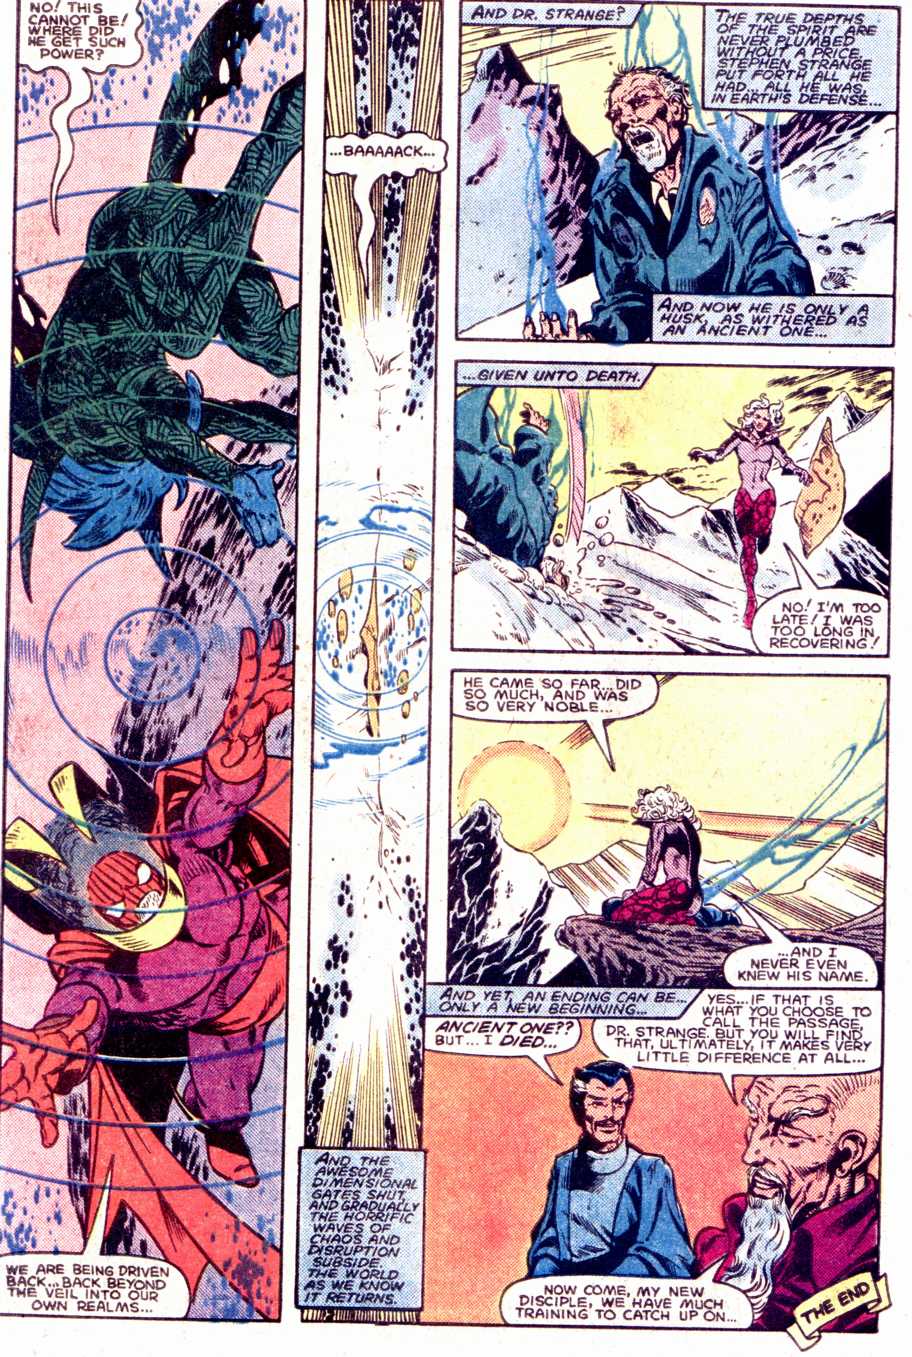 What If? (1977) issue 40 - Dr Strange had not become master of The mystic arts - Page 41